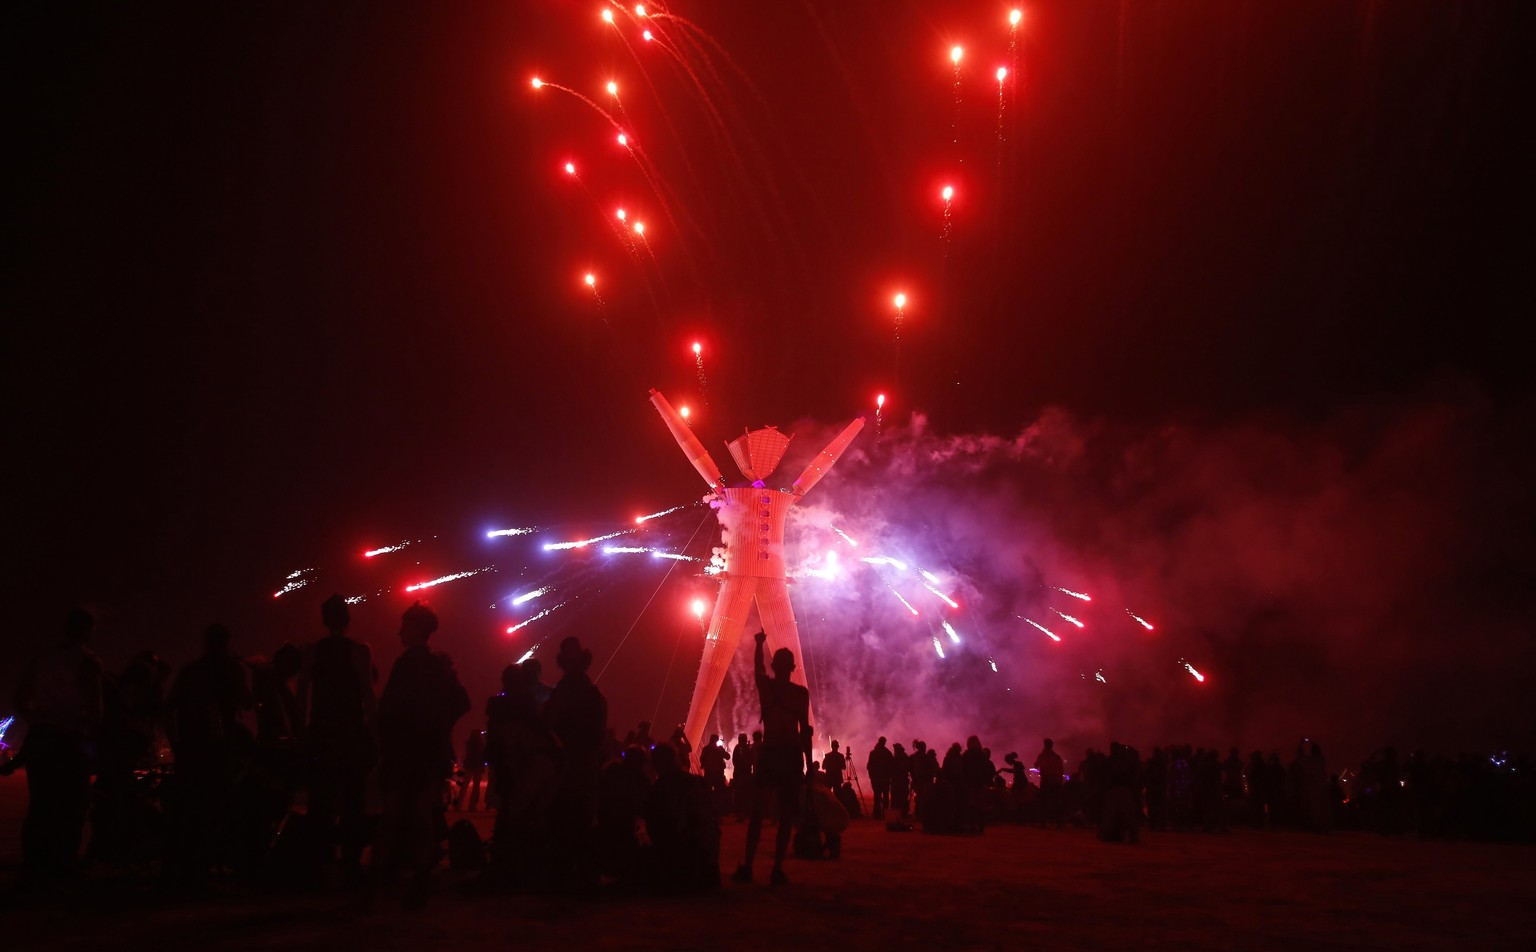 Fireworks are seen before the Man burns during the Burning Man 2014 &quot;Caravansary&quot; arts and music festival in the Black Rock Desert of Nevada, August 30, 2014. Over 65,000 people from all ove ...